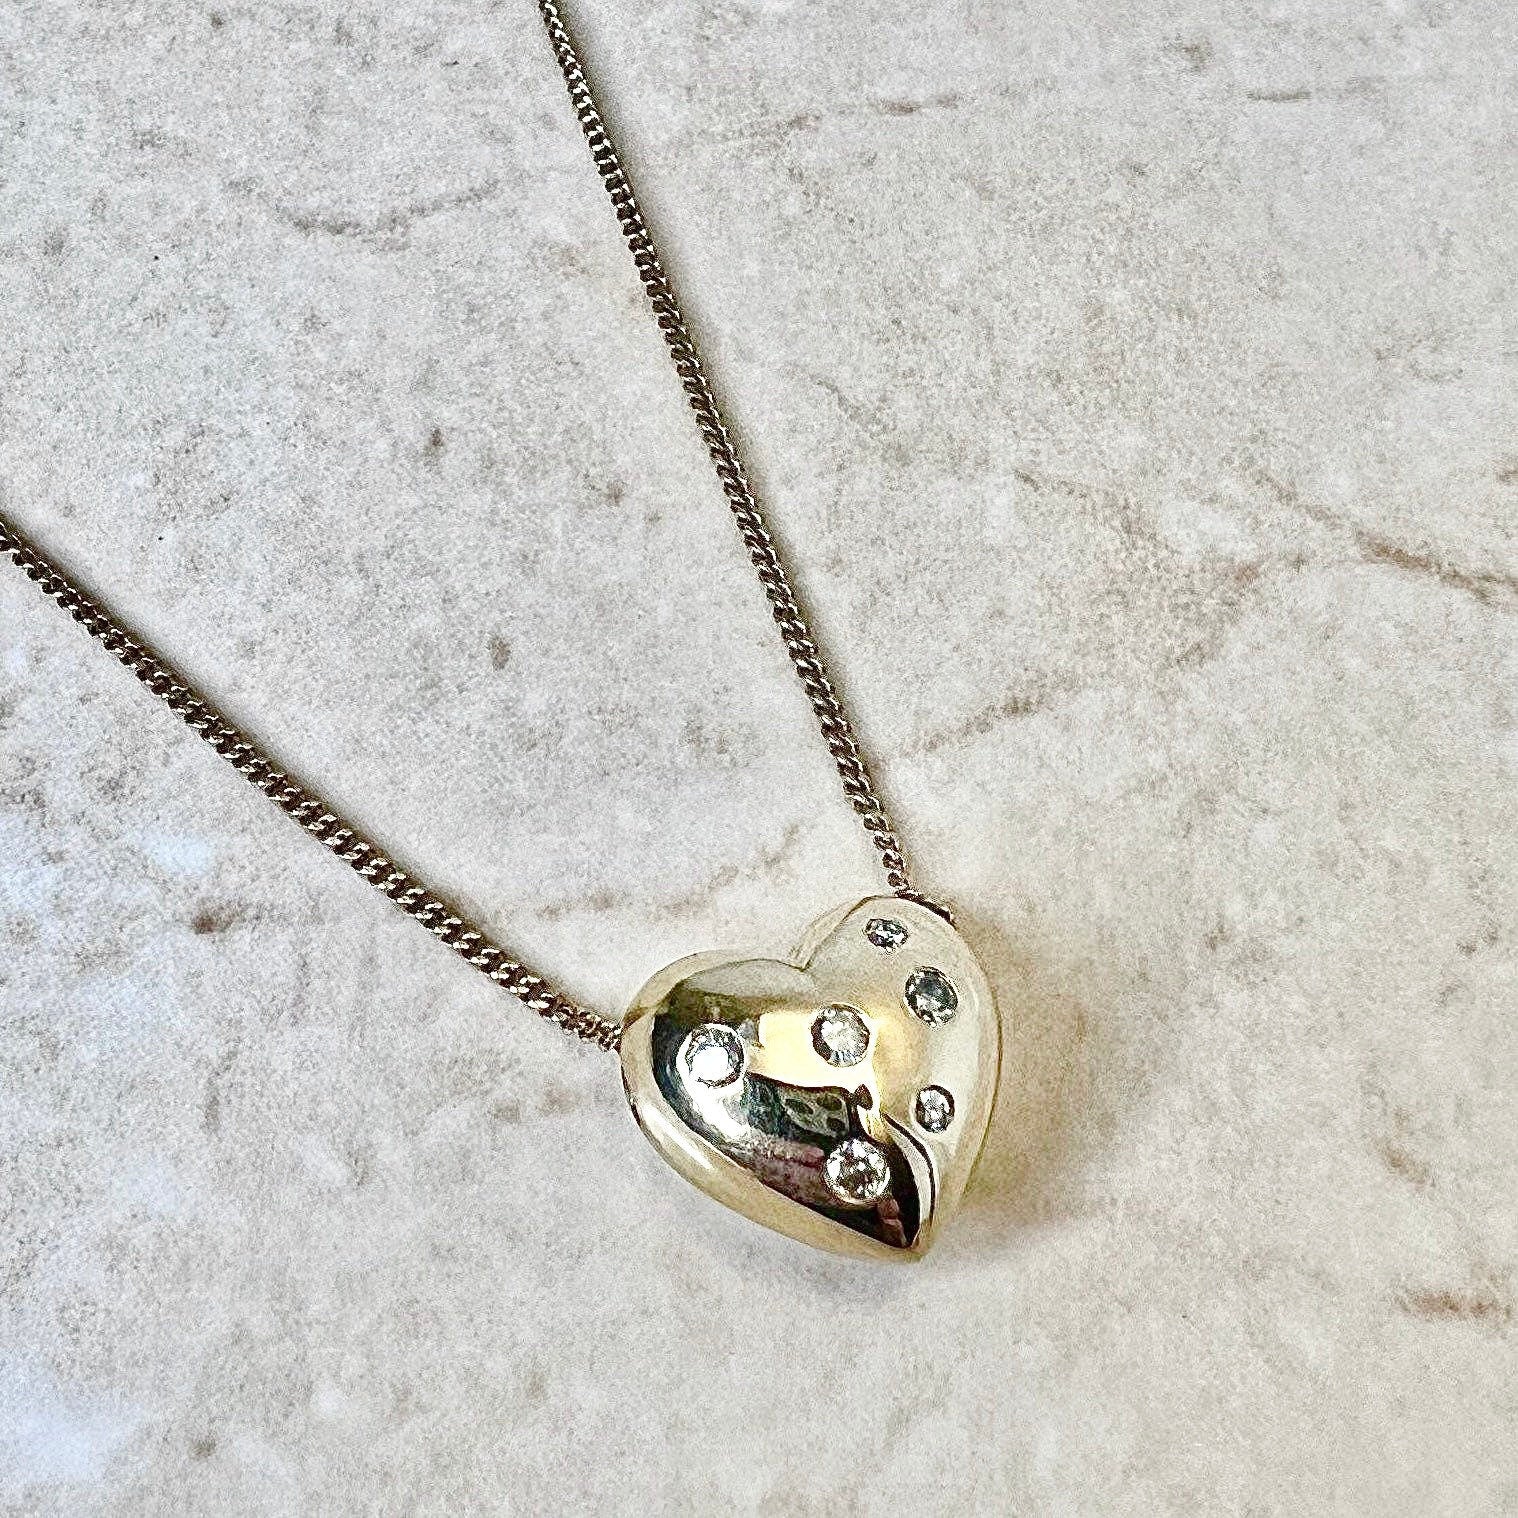 Fine 14K Diamond Heart Pendant Necklace - Yellow Gold Diamond Necklace - Gold Heart Necklace - Birthday Gift - Valentine’s Day Gifts For Her